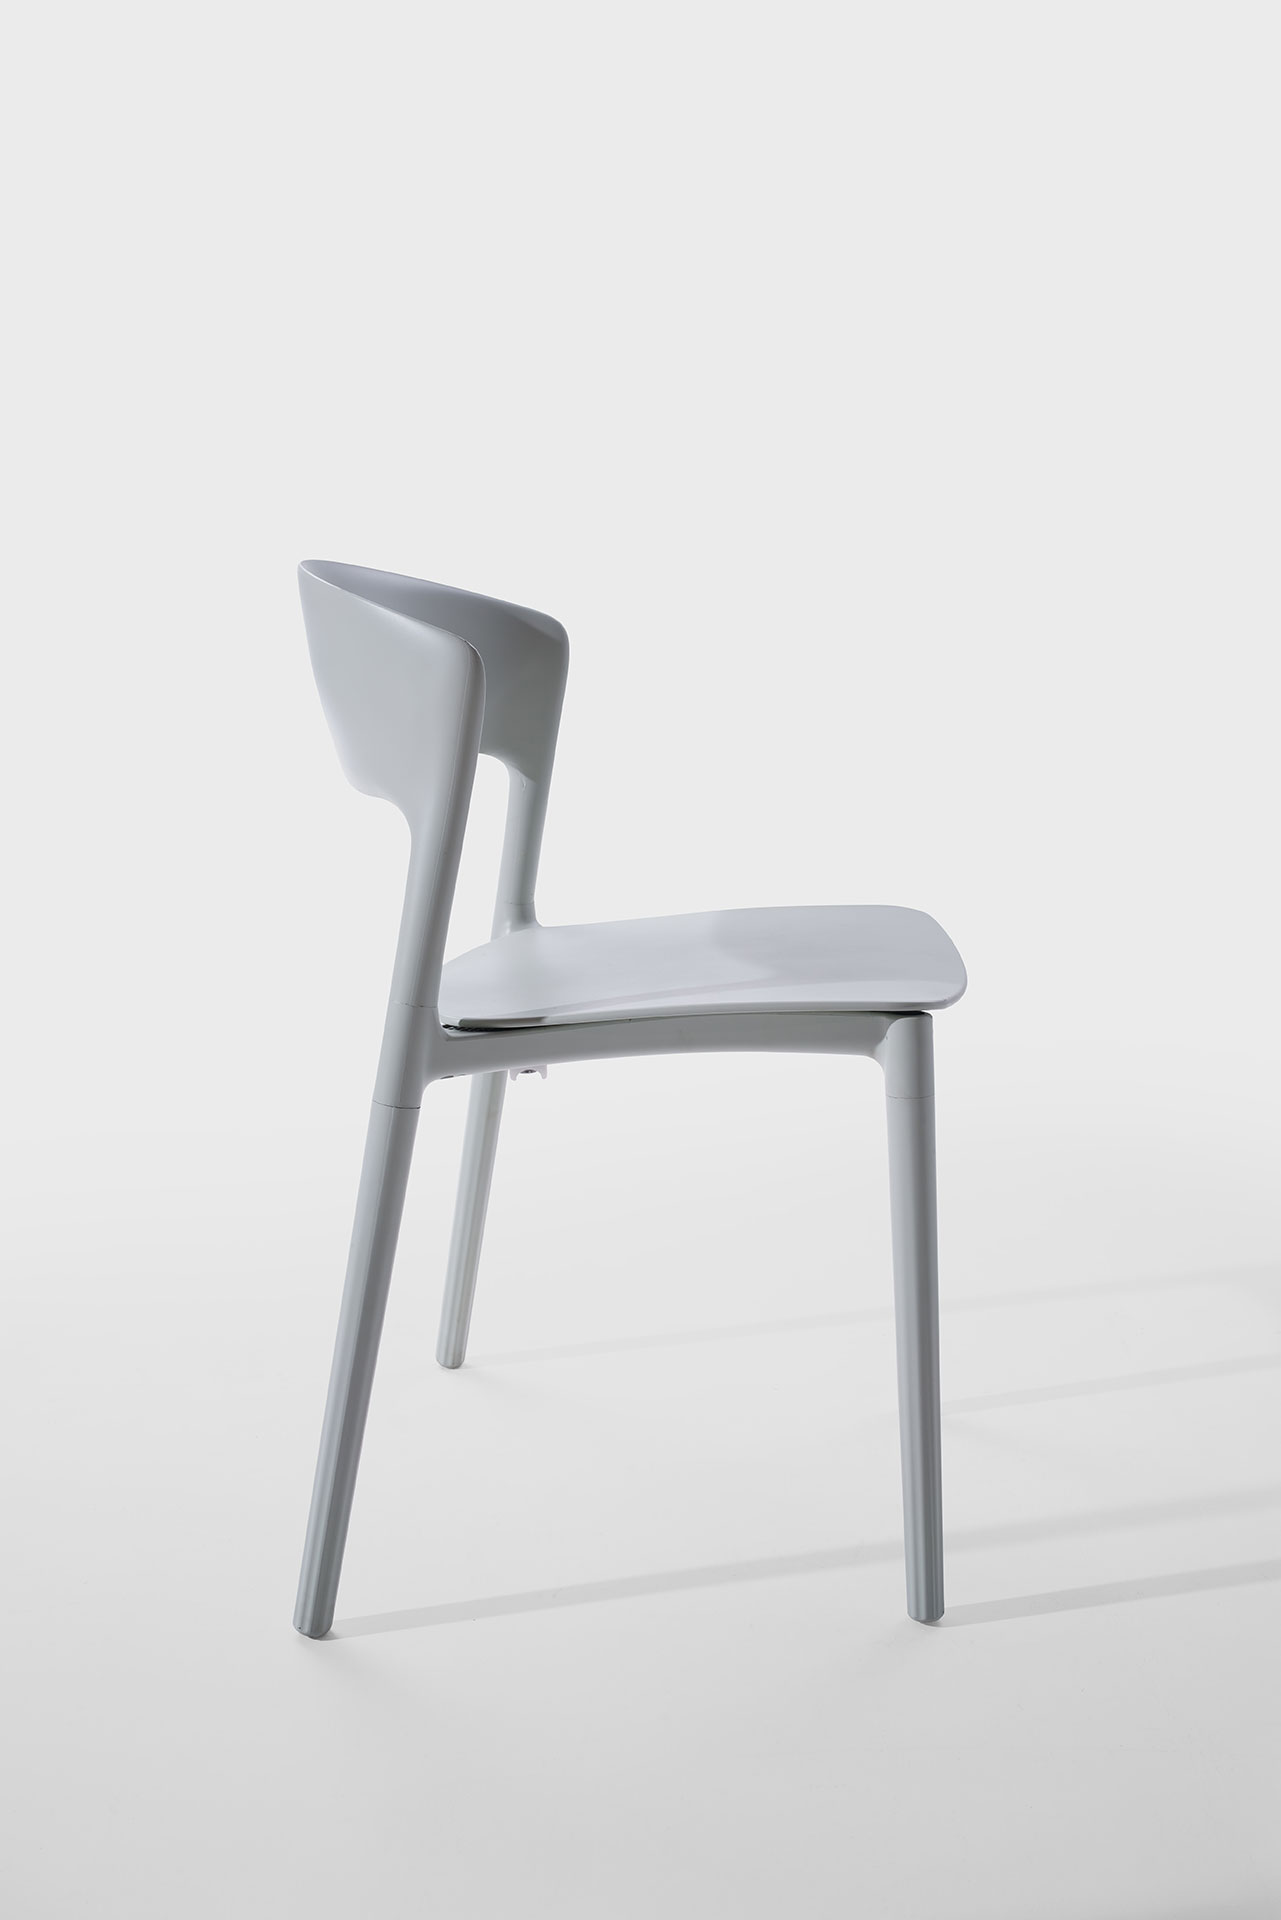 Seven - A new way of thinking the chair